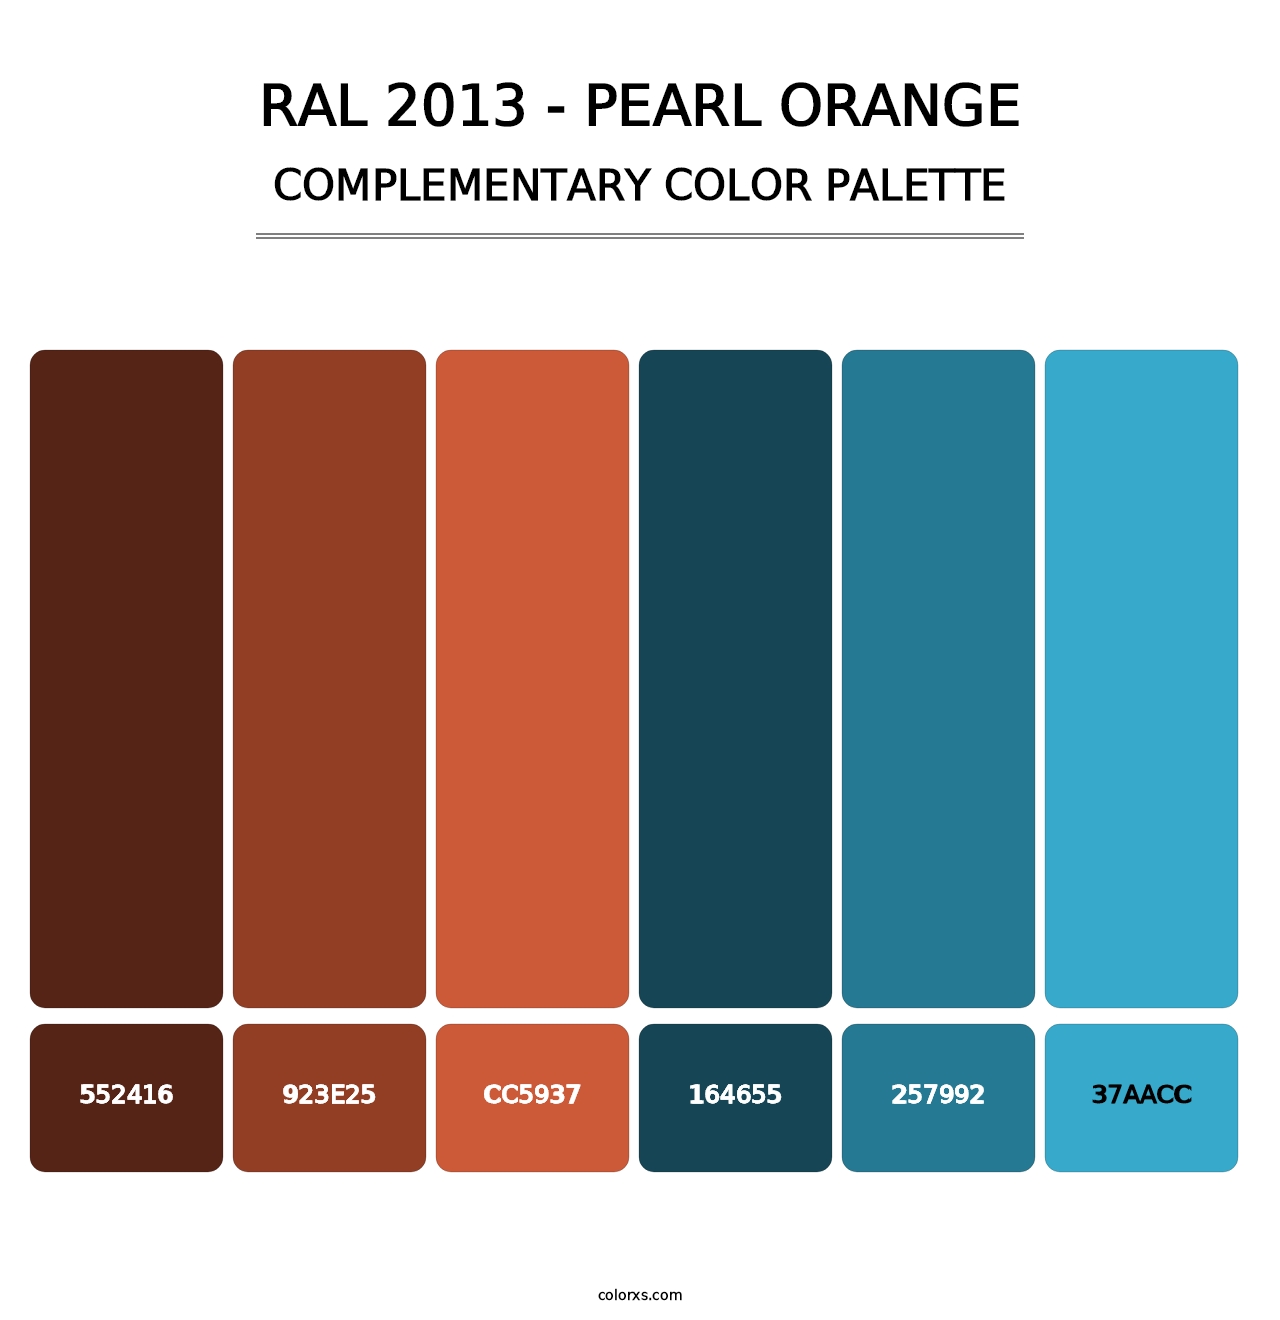 RAL 2013 - Pearl Orange - Complementary Color Palette